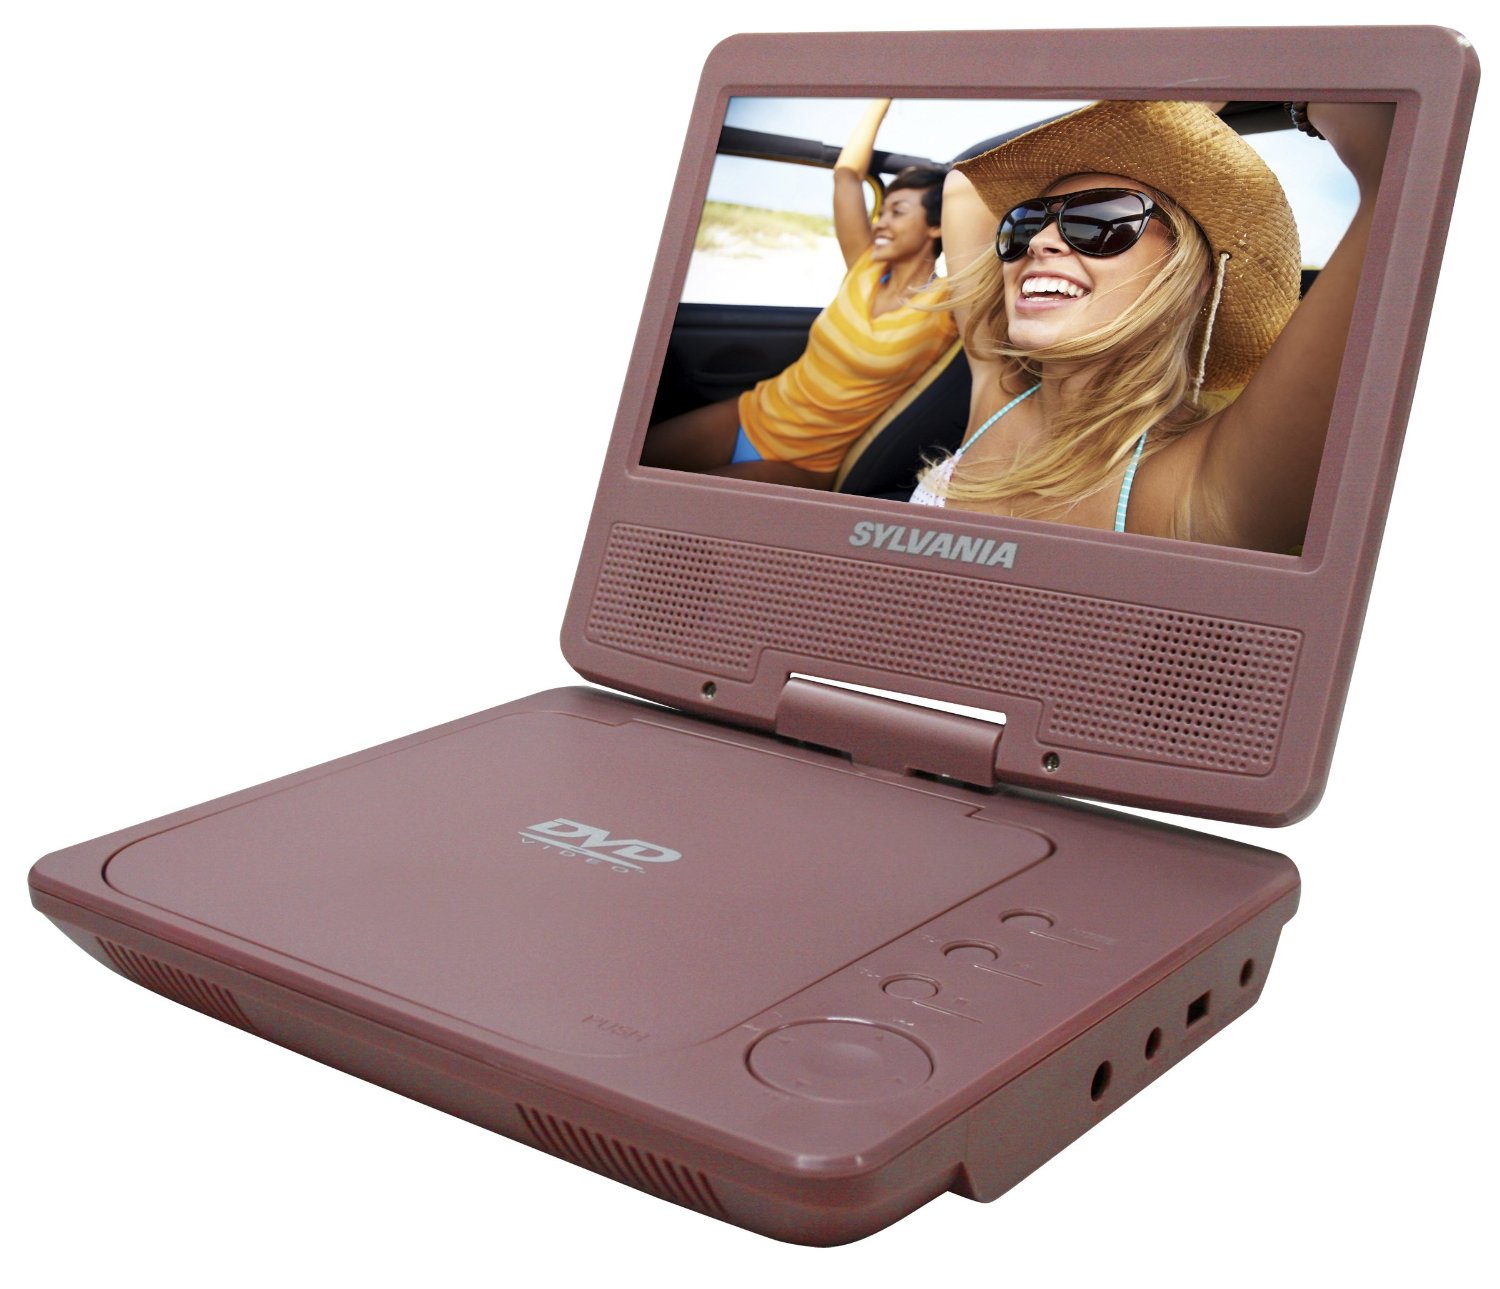 SDVD7014P 7in Pink Portable DVD Player